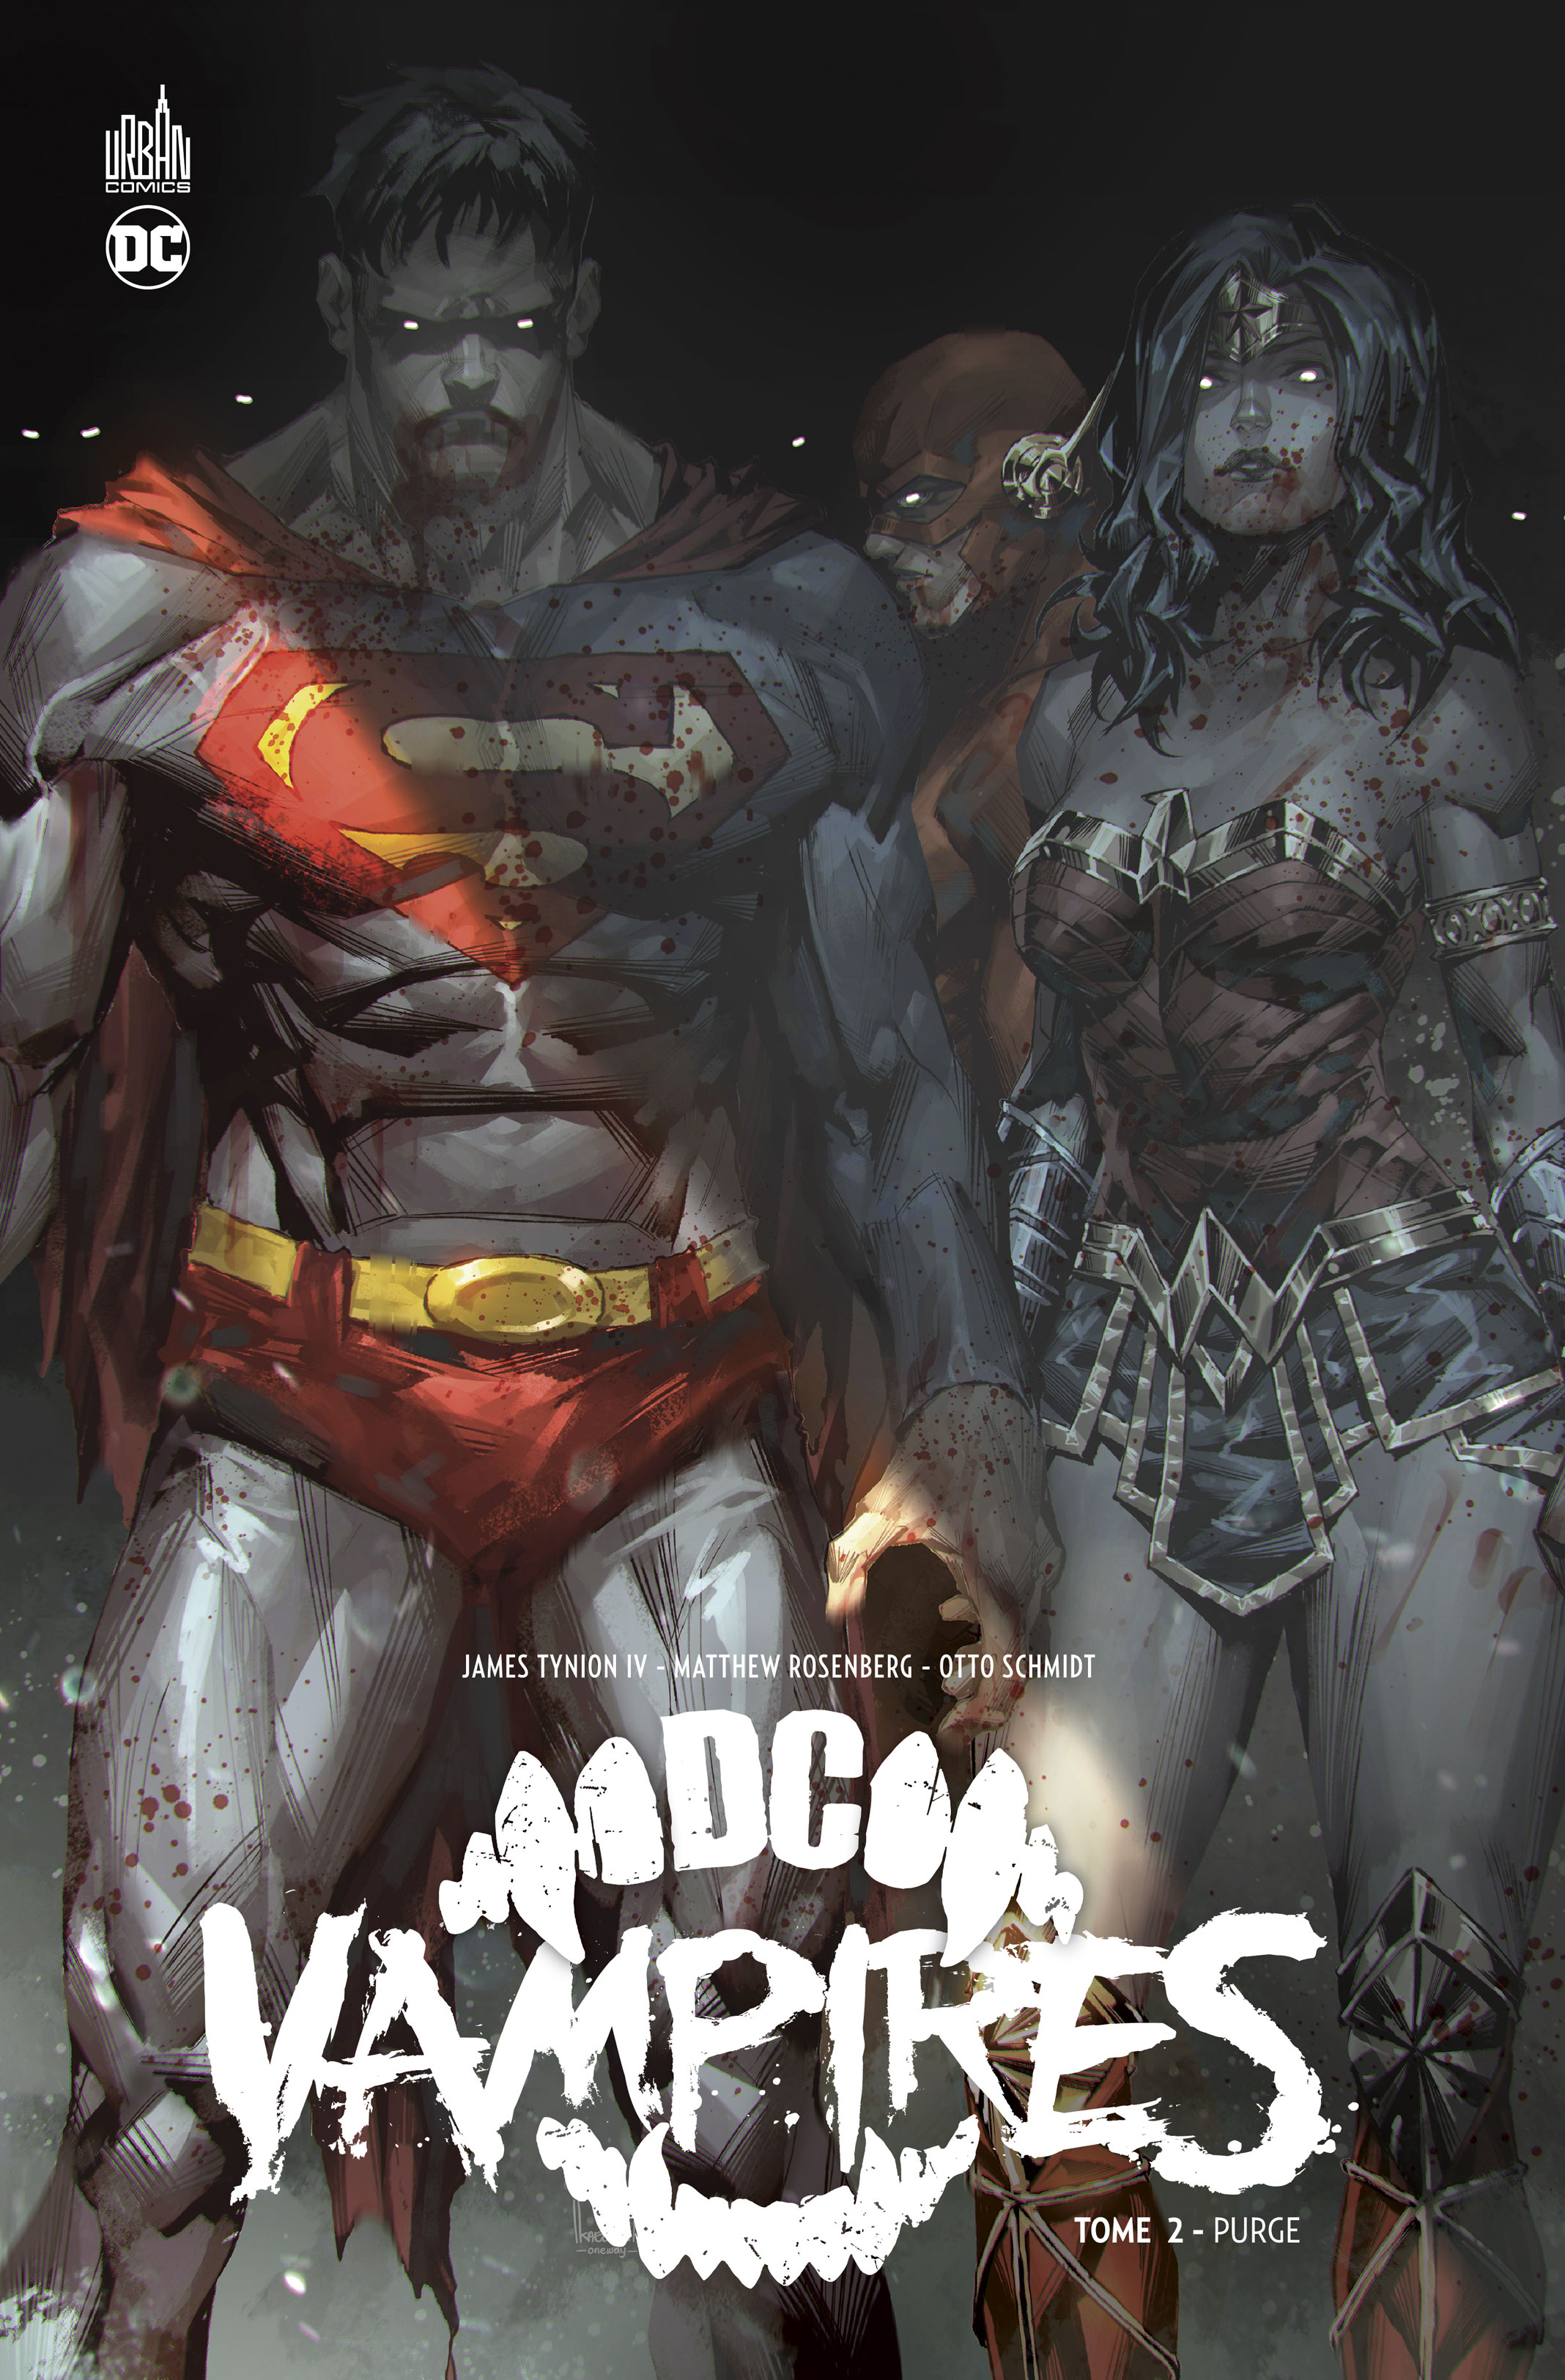 DC Vampires – Tome 2 - couv